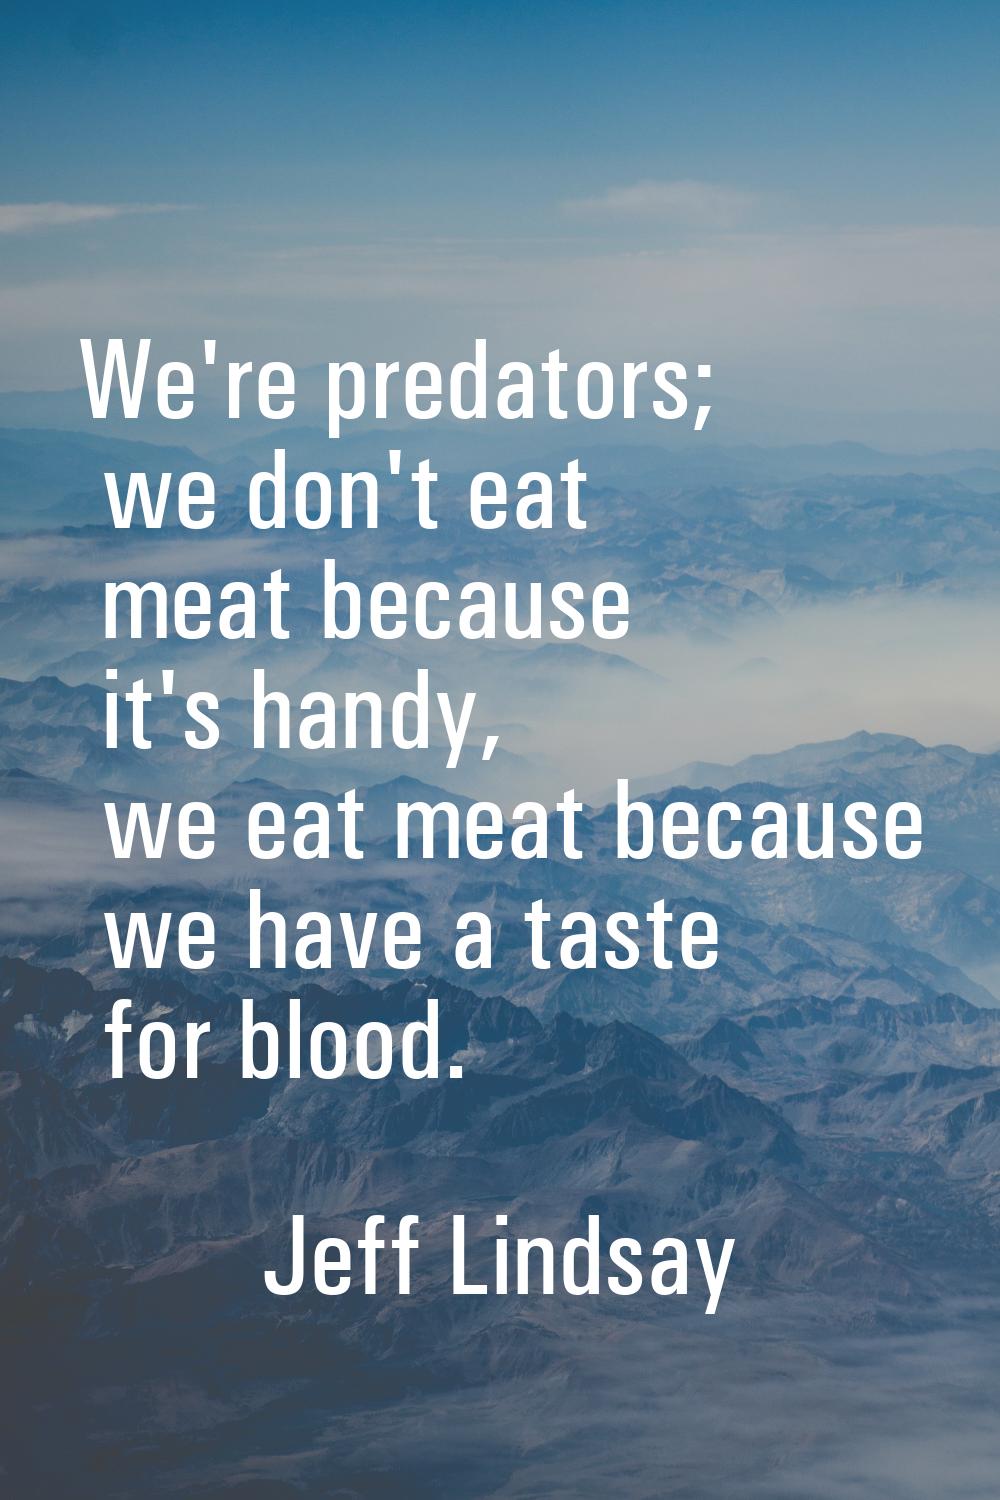 We're predators; we don't eat meat because it's handy, we eat meat because we have a taste for bloo